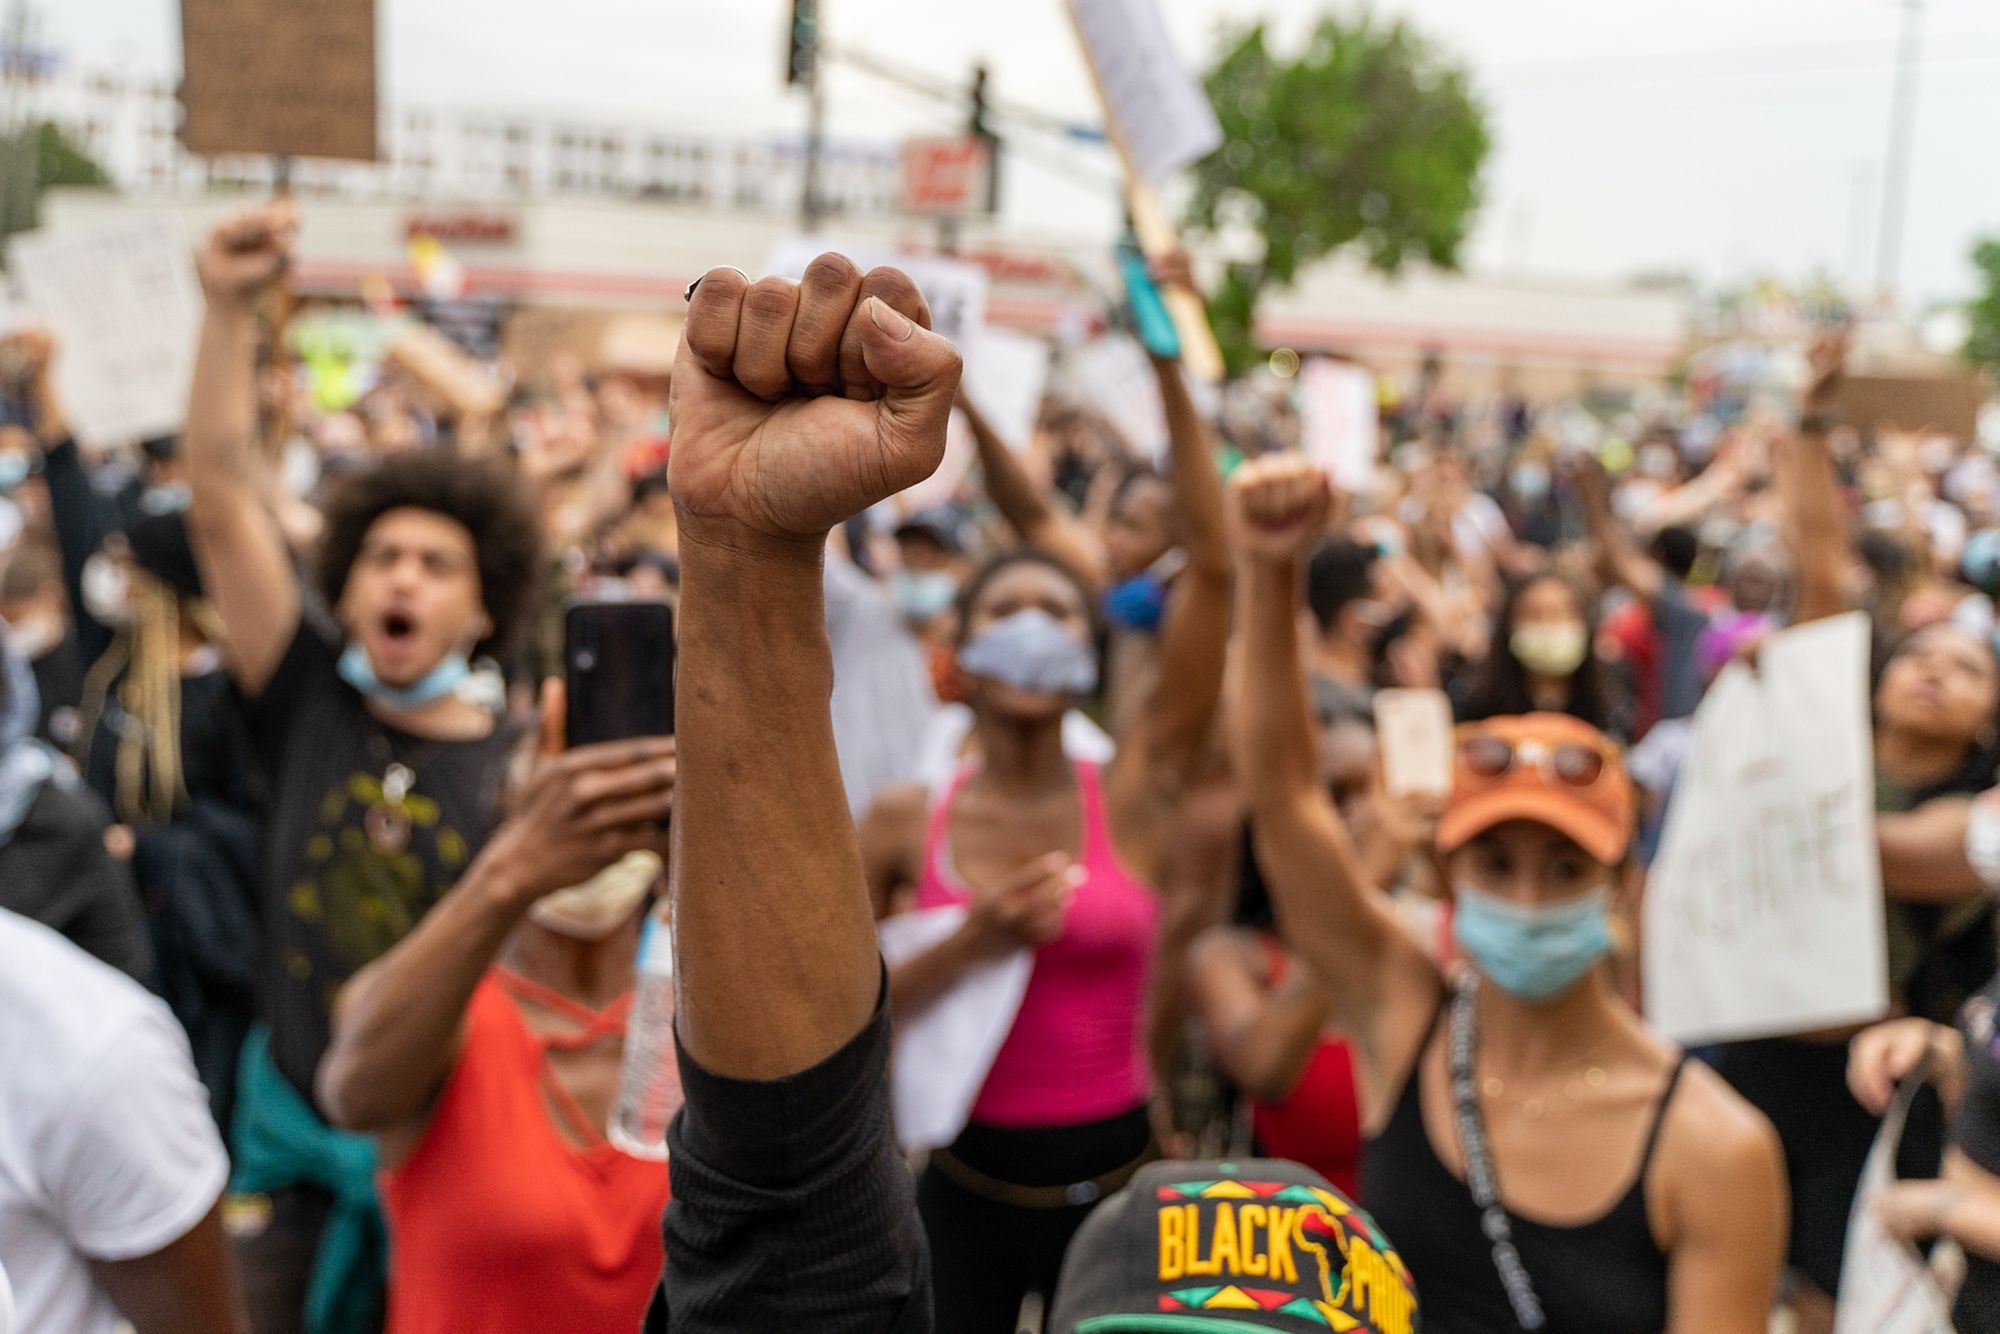 Image of the raised and clenched fists of a large group of protestors demanding Justice for George Floyd